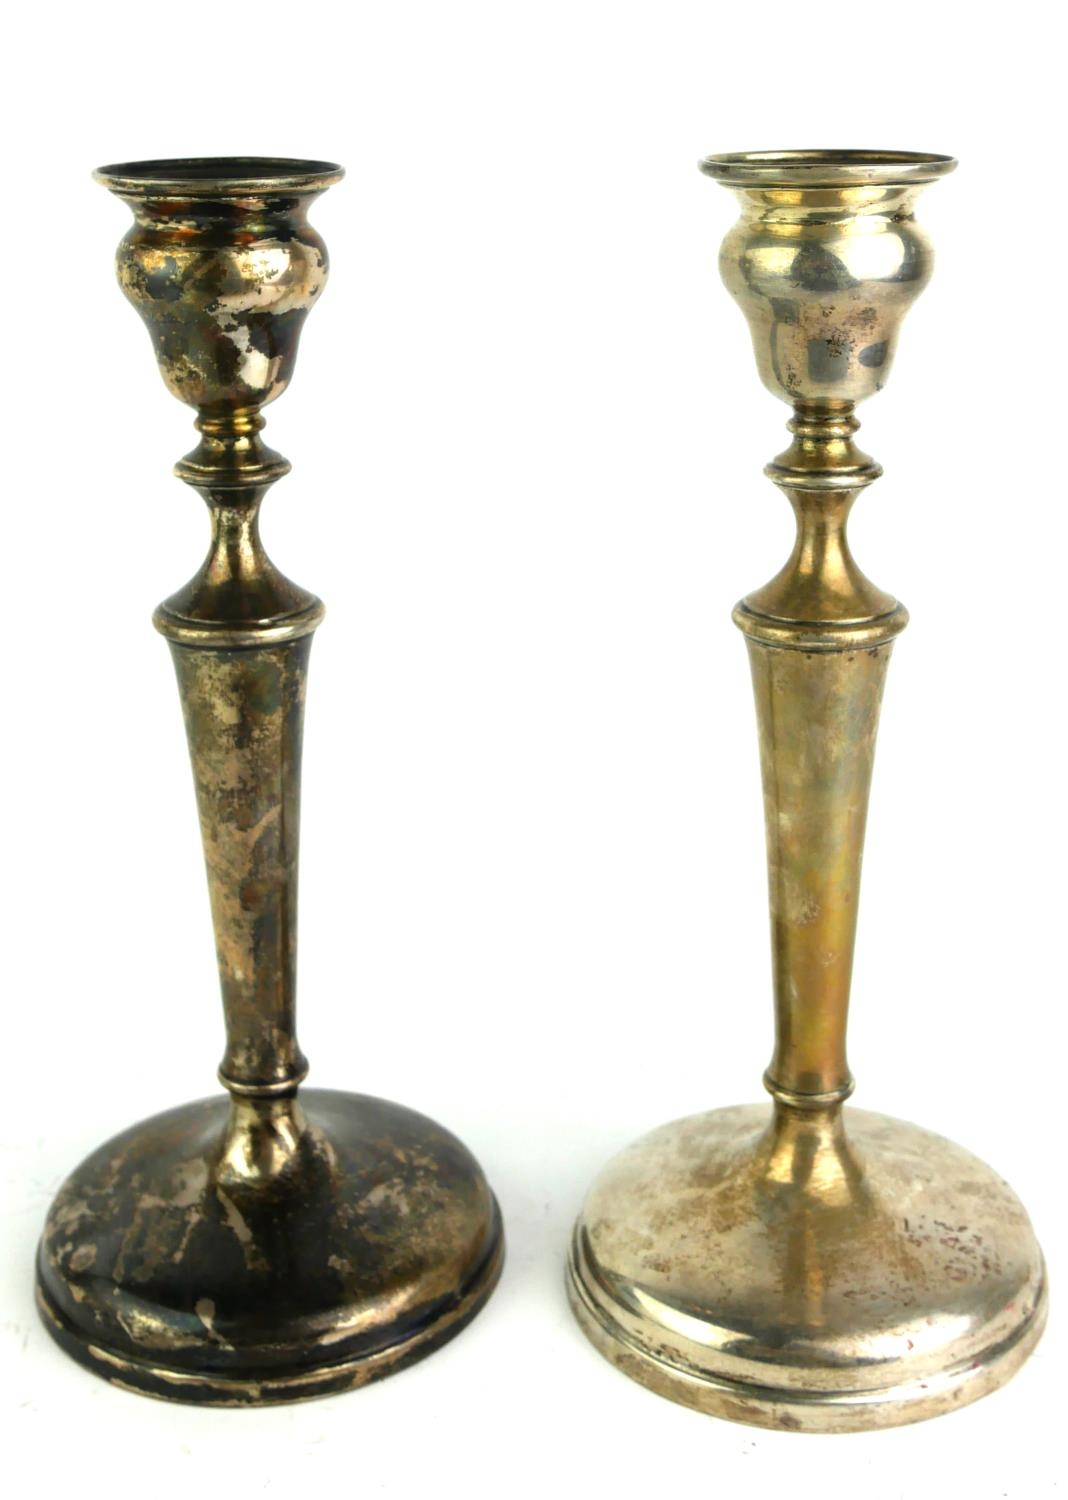 A PAIR OF EDWARDIAN PLAIN SILVER CANDLESTICKS On circular bases, hallmarked London, 1910. (approx